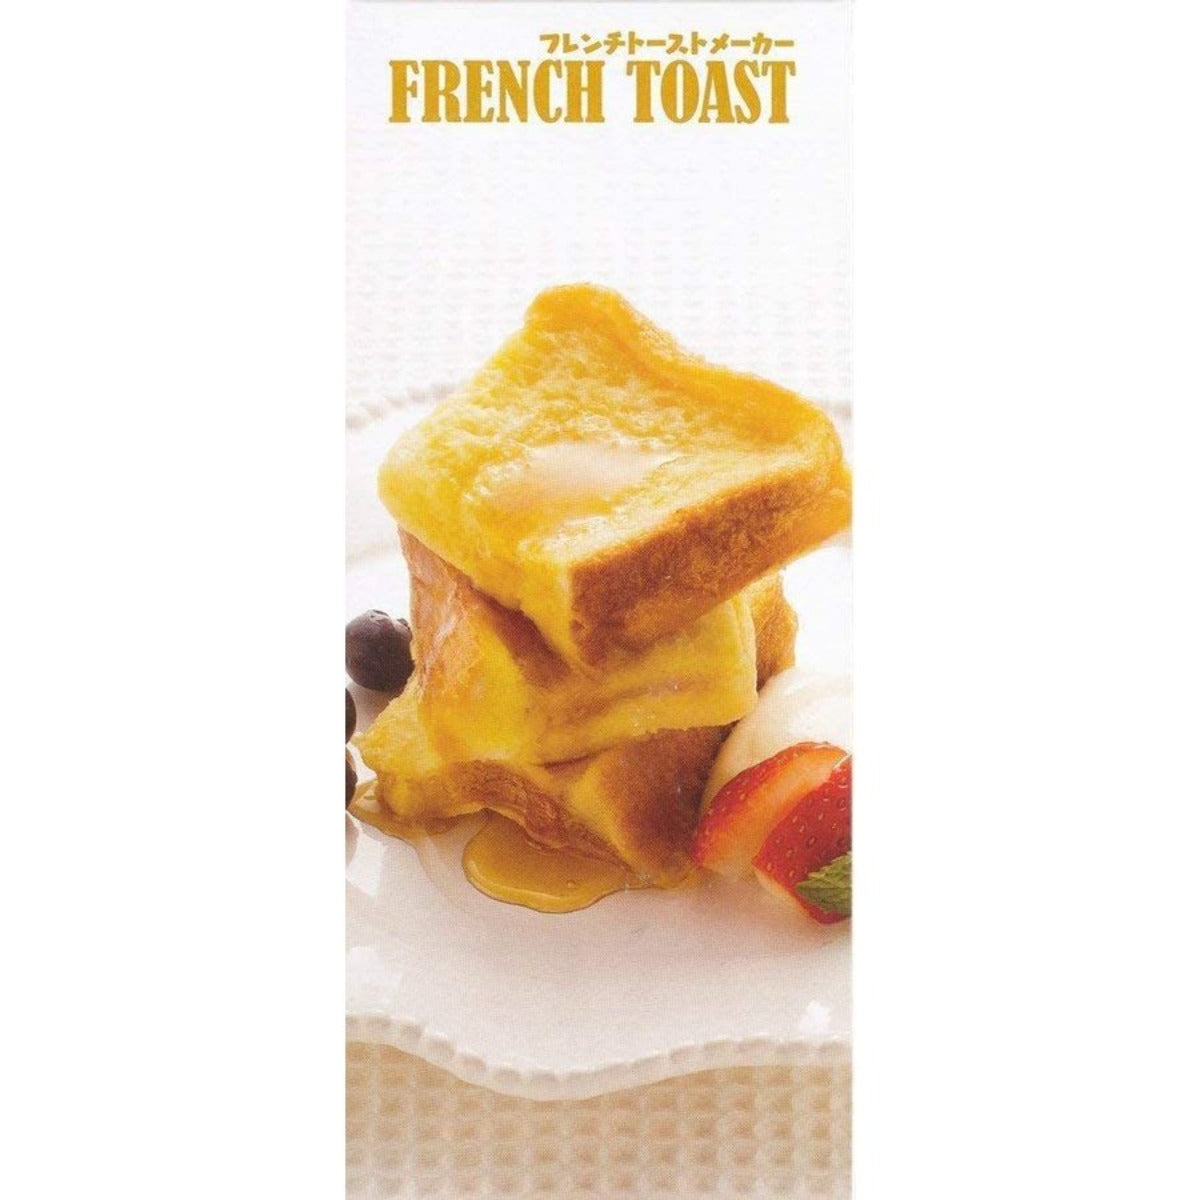 Food Container Snoopy French Toast J